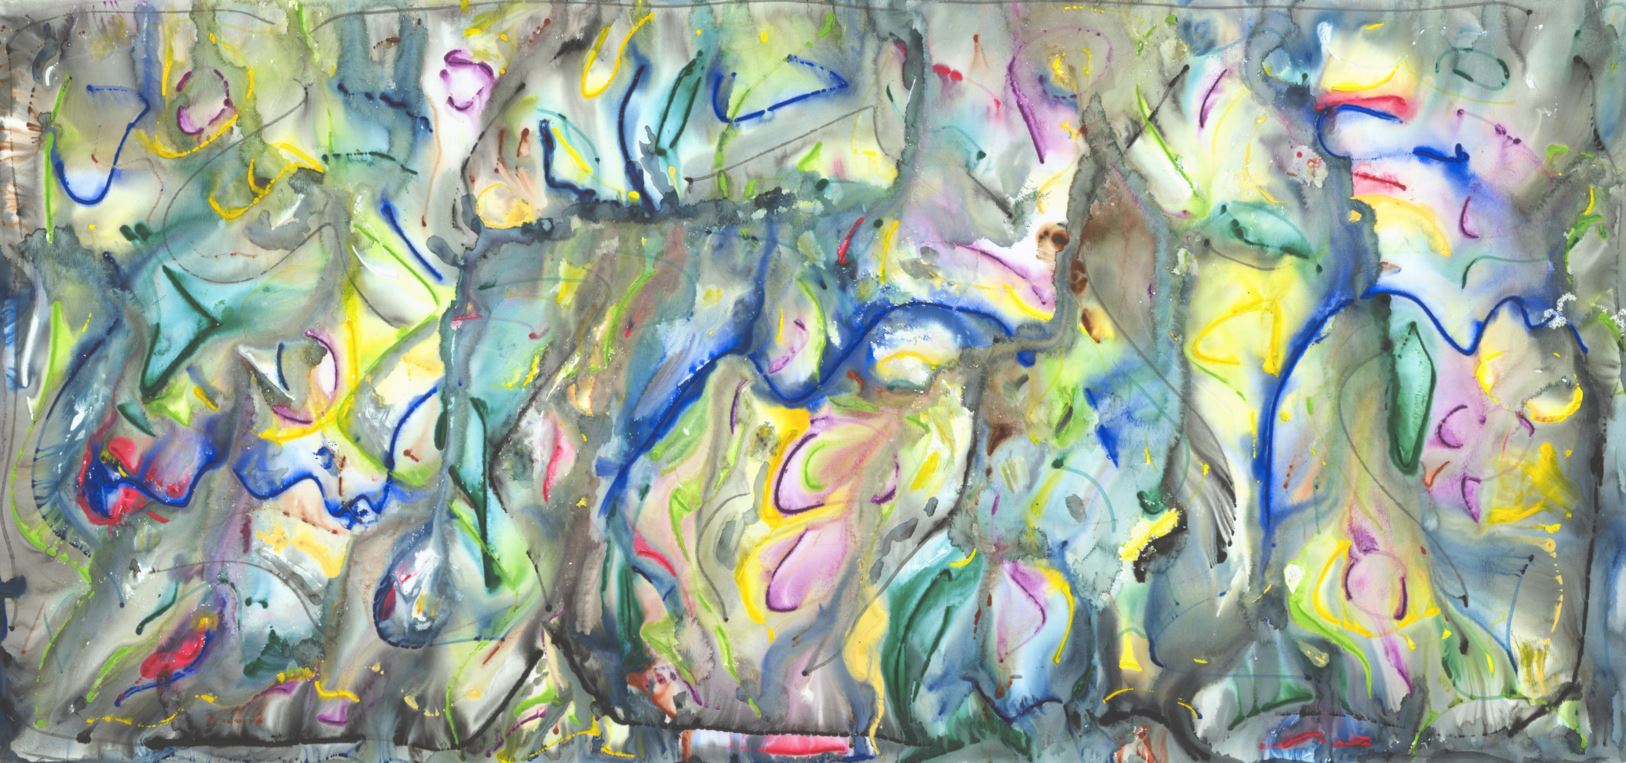 String Theory #2, 2012 | Watercolour on Paper | 679 x 1435 mm (26.75 x 56.5 inches)